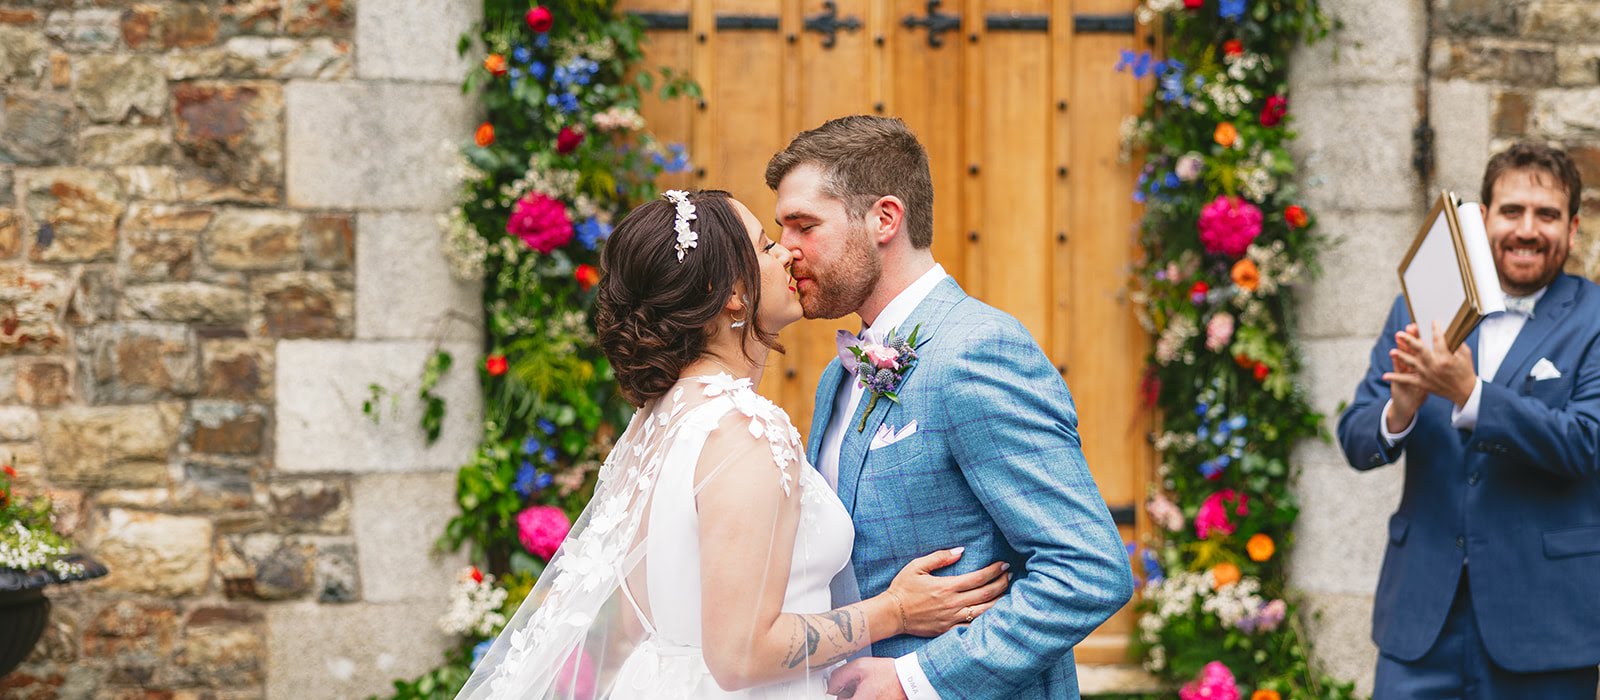 Real Weddings: Cat and Alexander’s colourful wedding at Waterford Castle